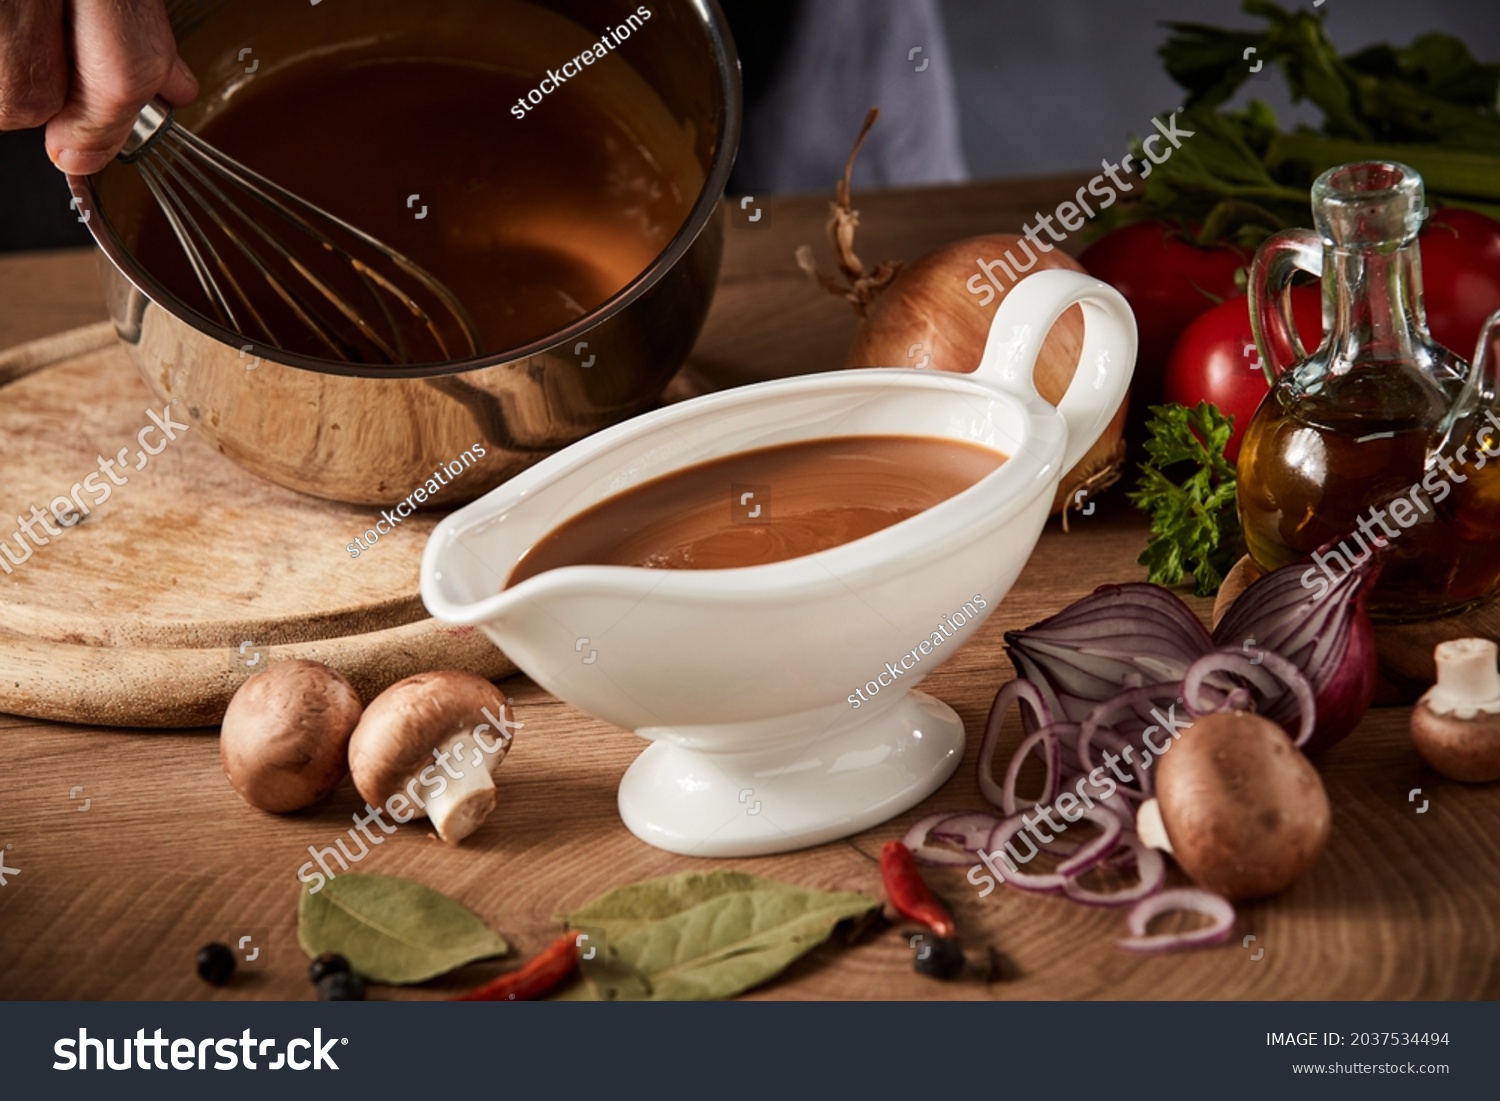 Chef preparing a serving of delicious spicy rich gravy whisking it in a pot with a close up view on a full sauce boat or pitcher in the foreground #2037534494